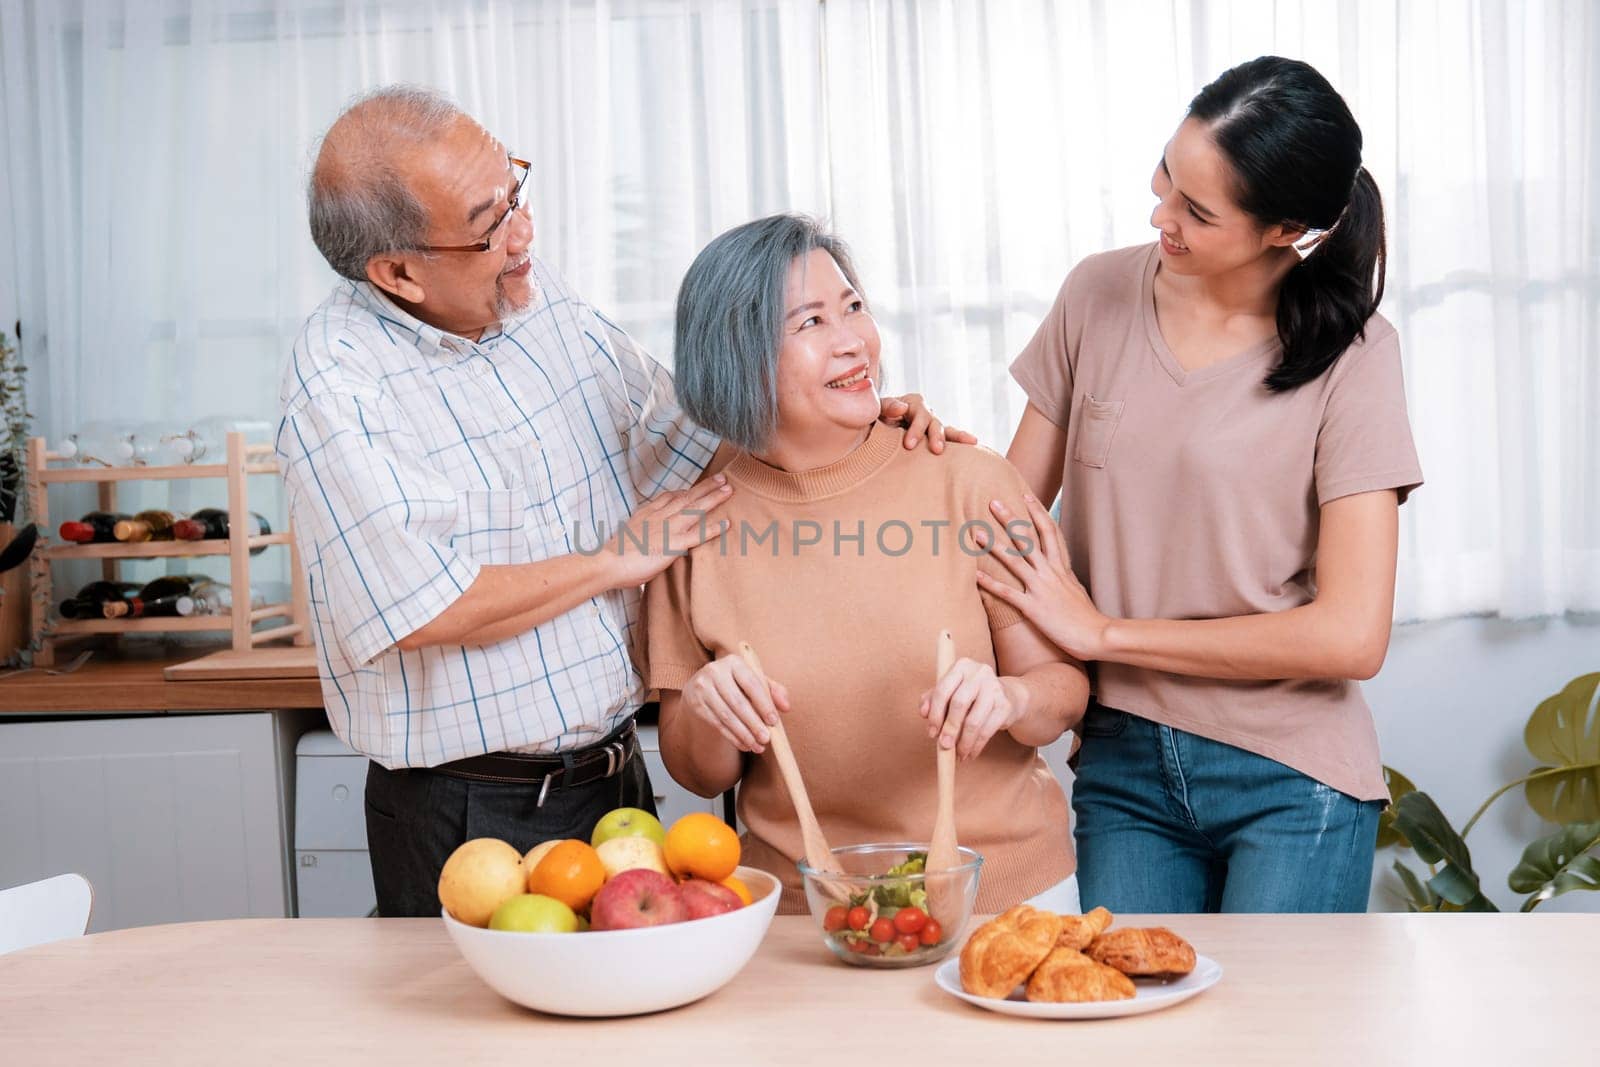 Contented family, daughter, father, mother prepare bread veggies and fruit salad together in their kitchen.